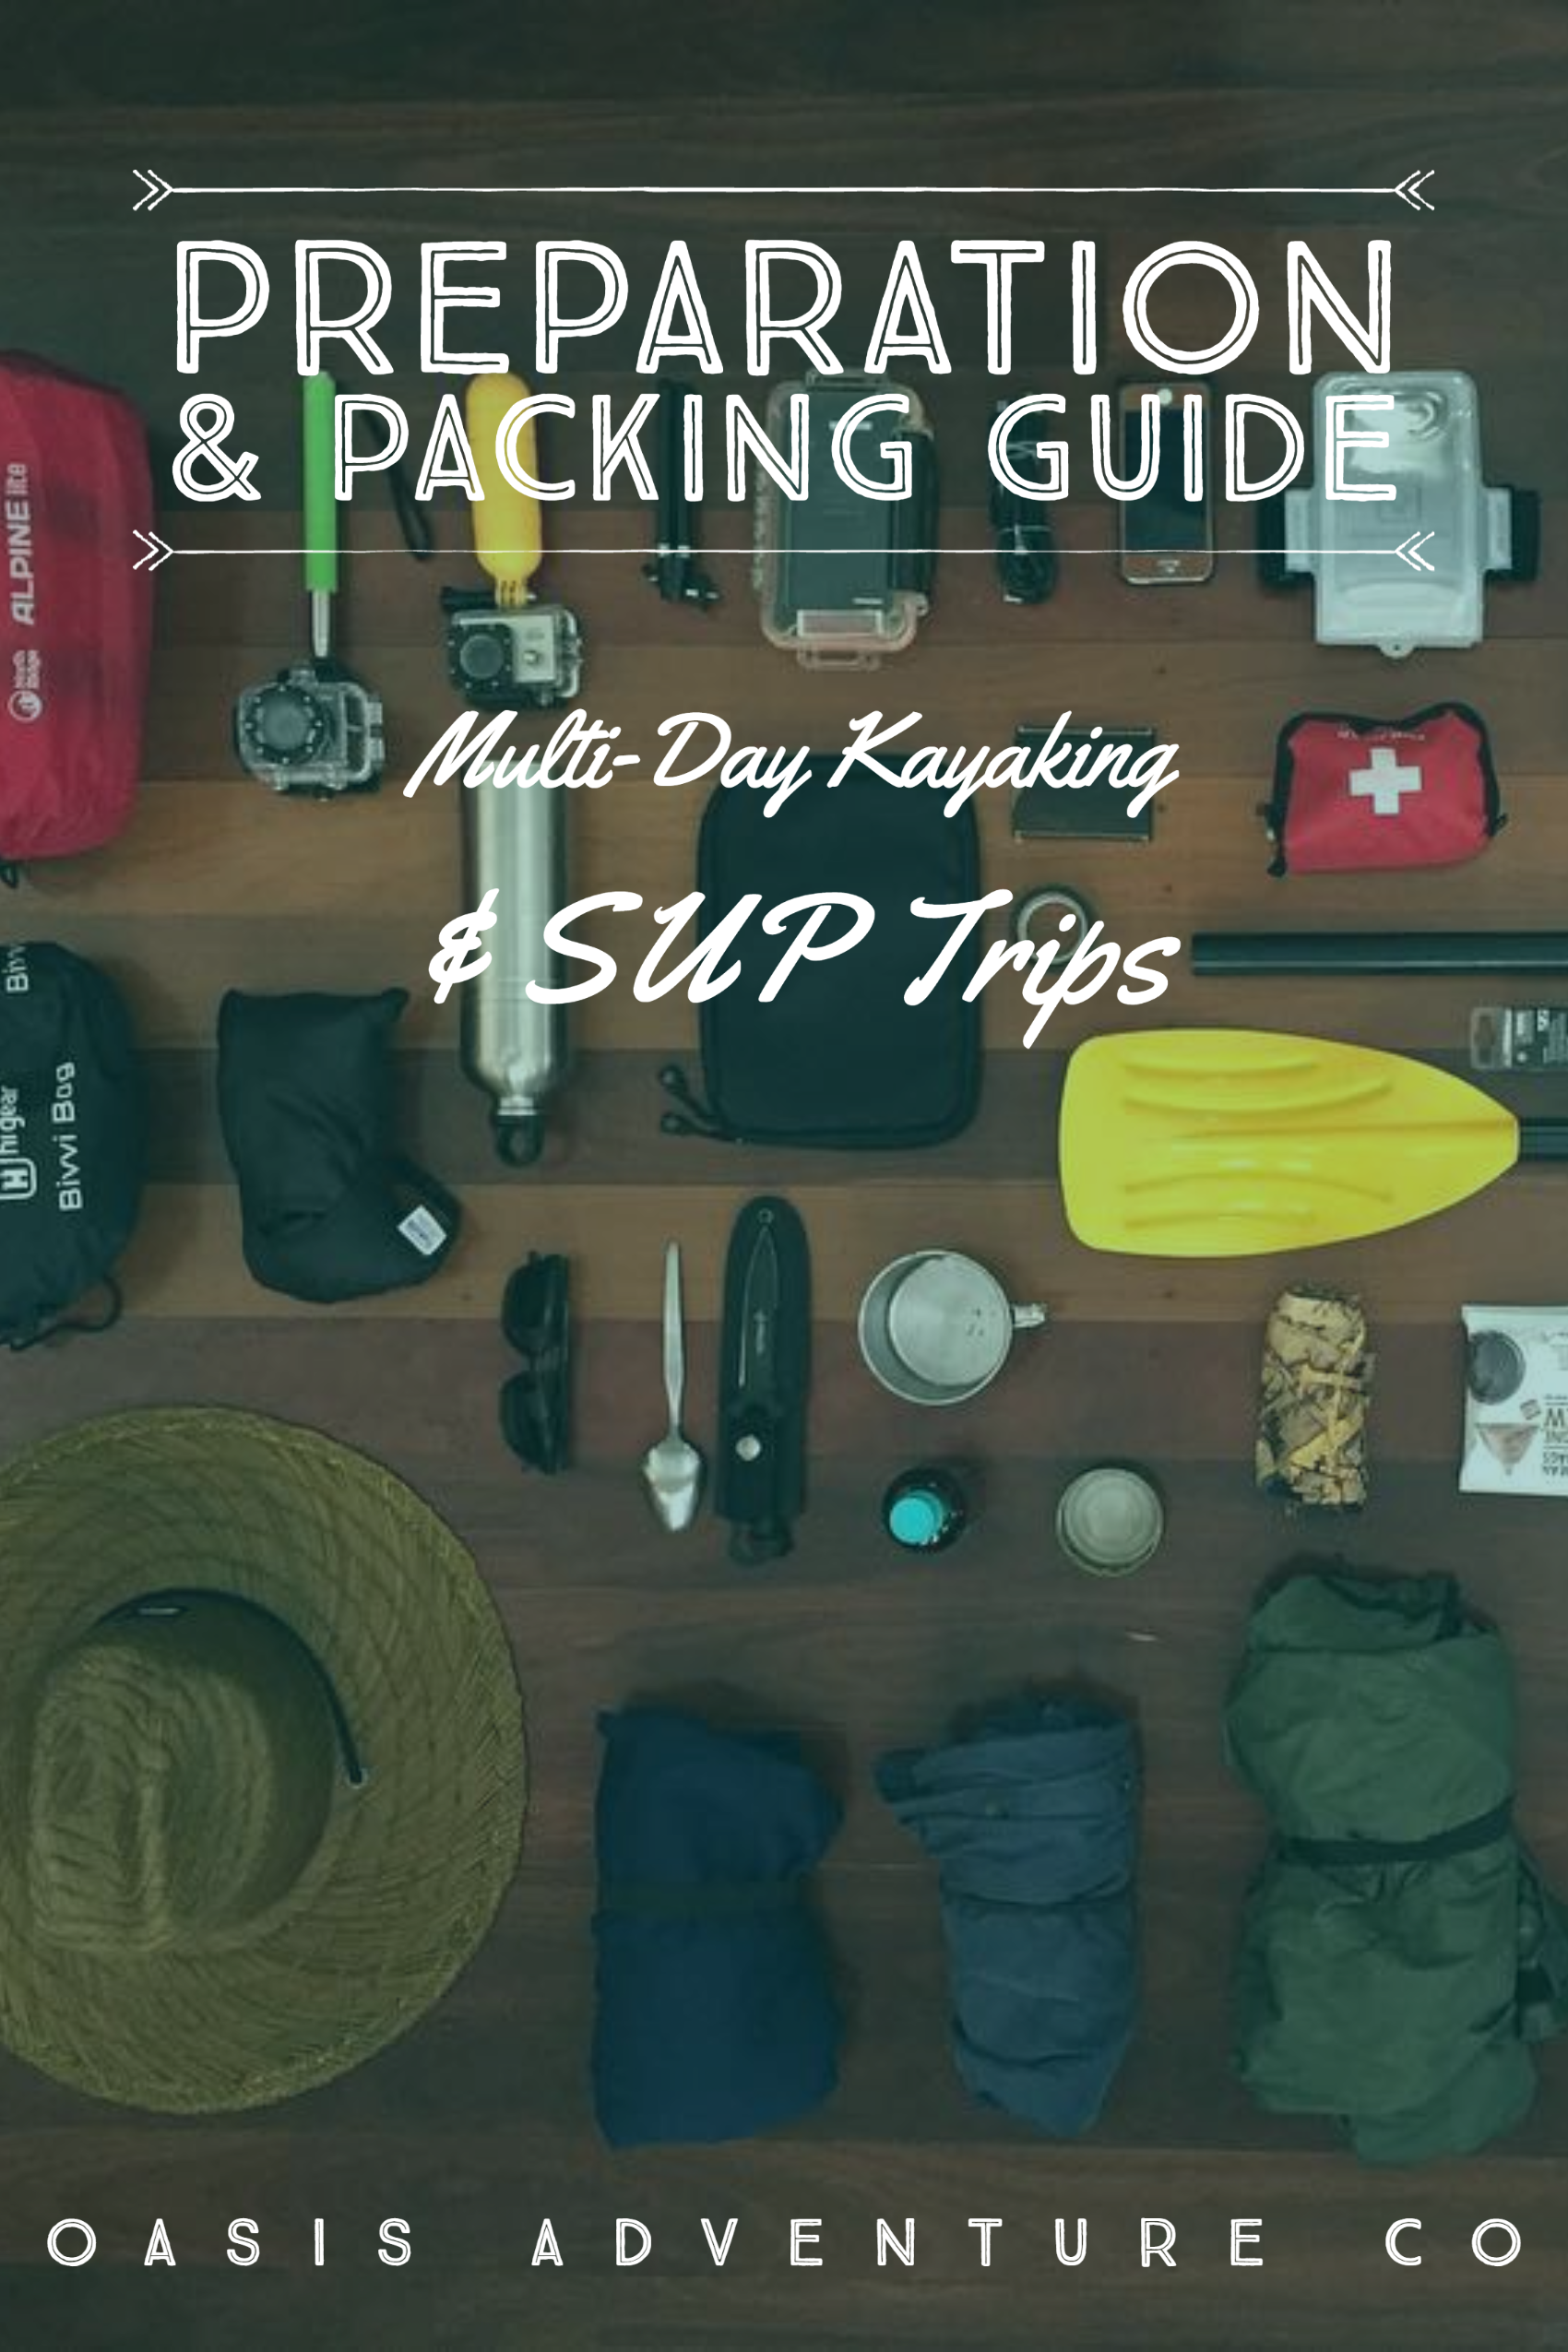 PREPARATION & PACKING GUIDE For Multi-day Kayak, Canoe and SUP Trips